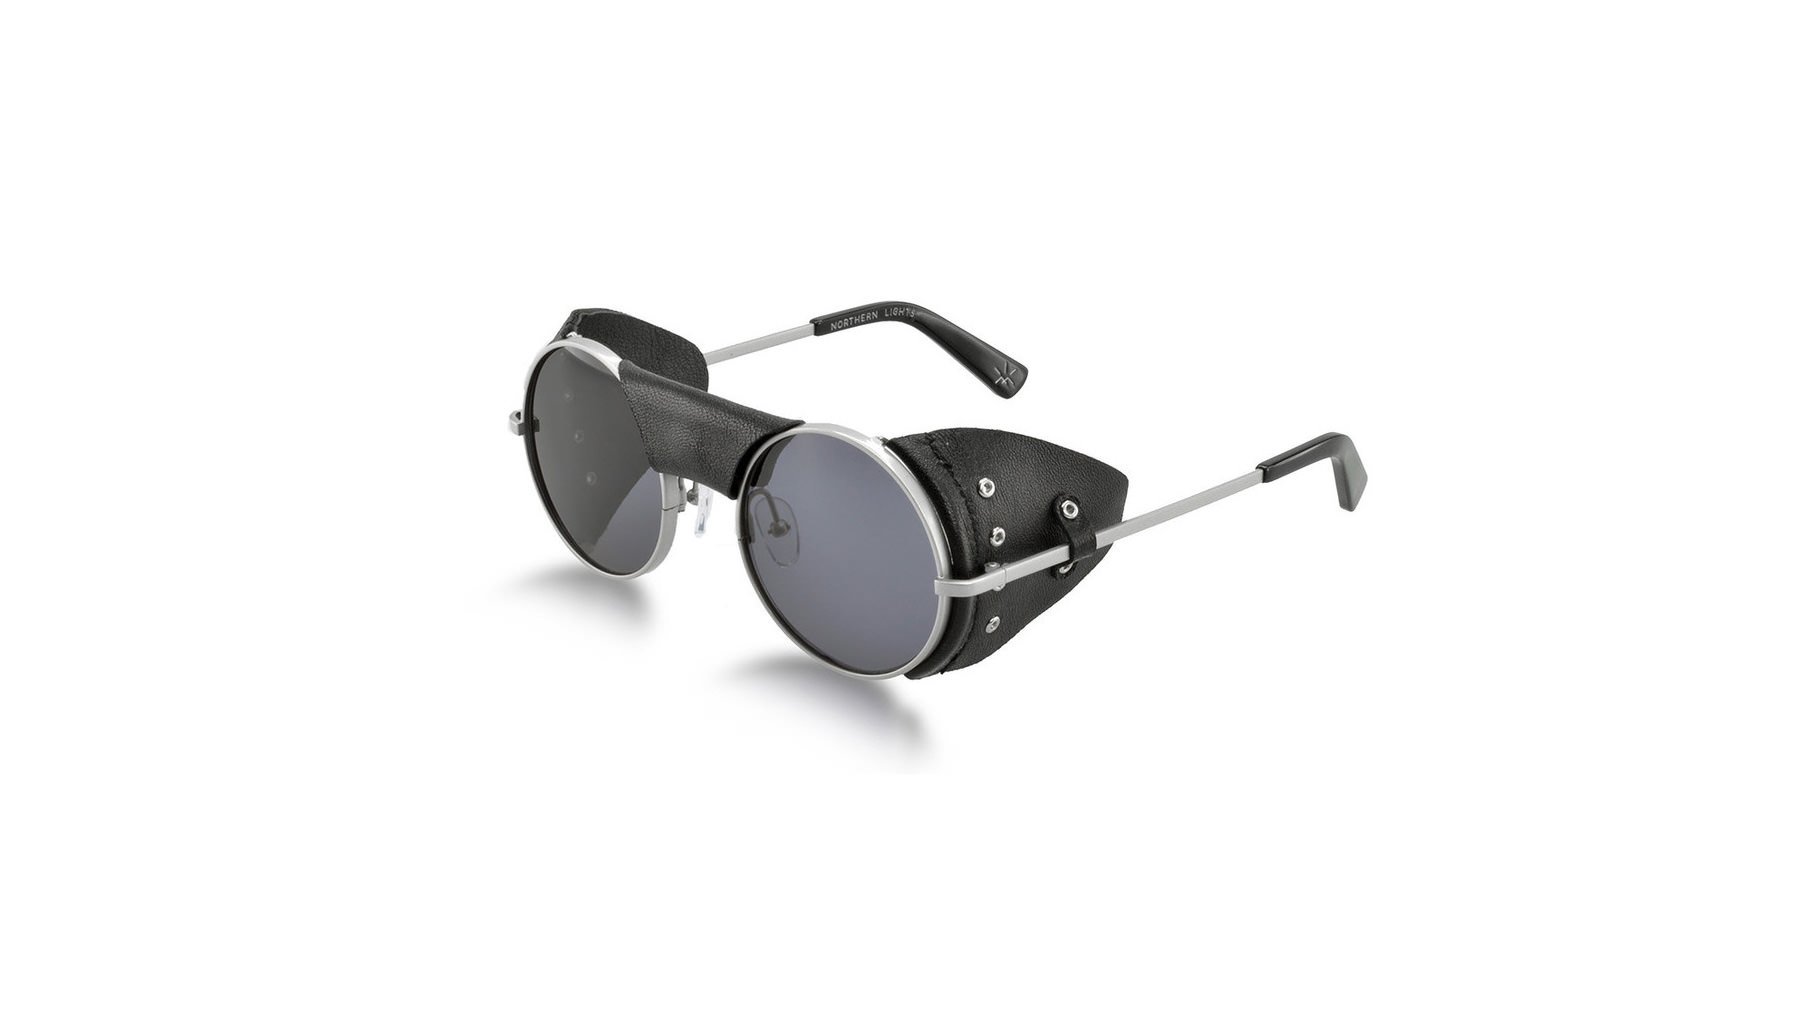 Mountaineering Sunglasses by Northern Lights Optic